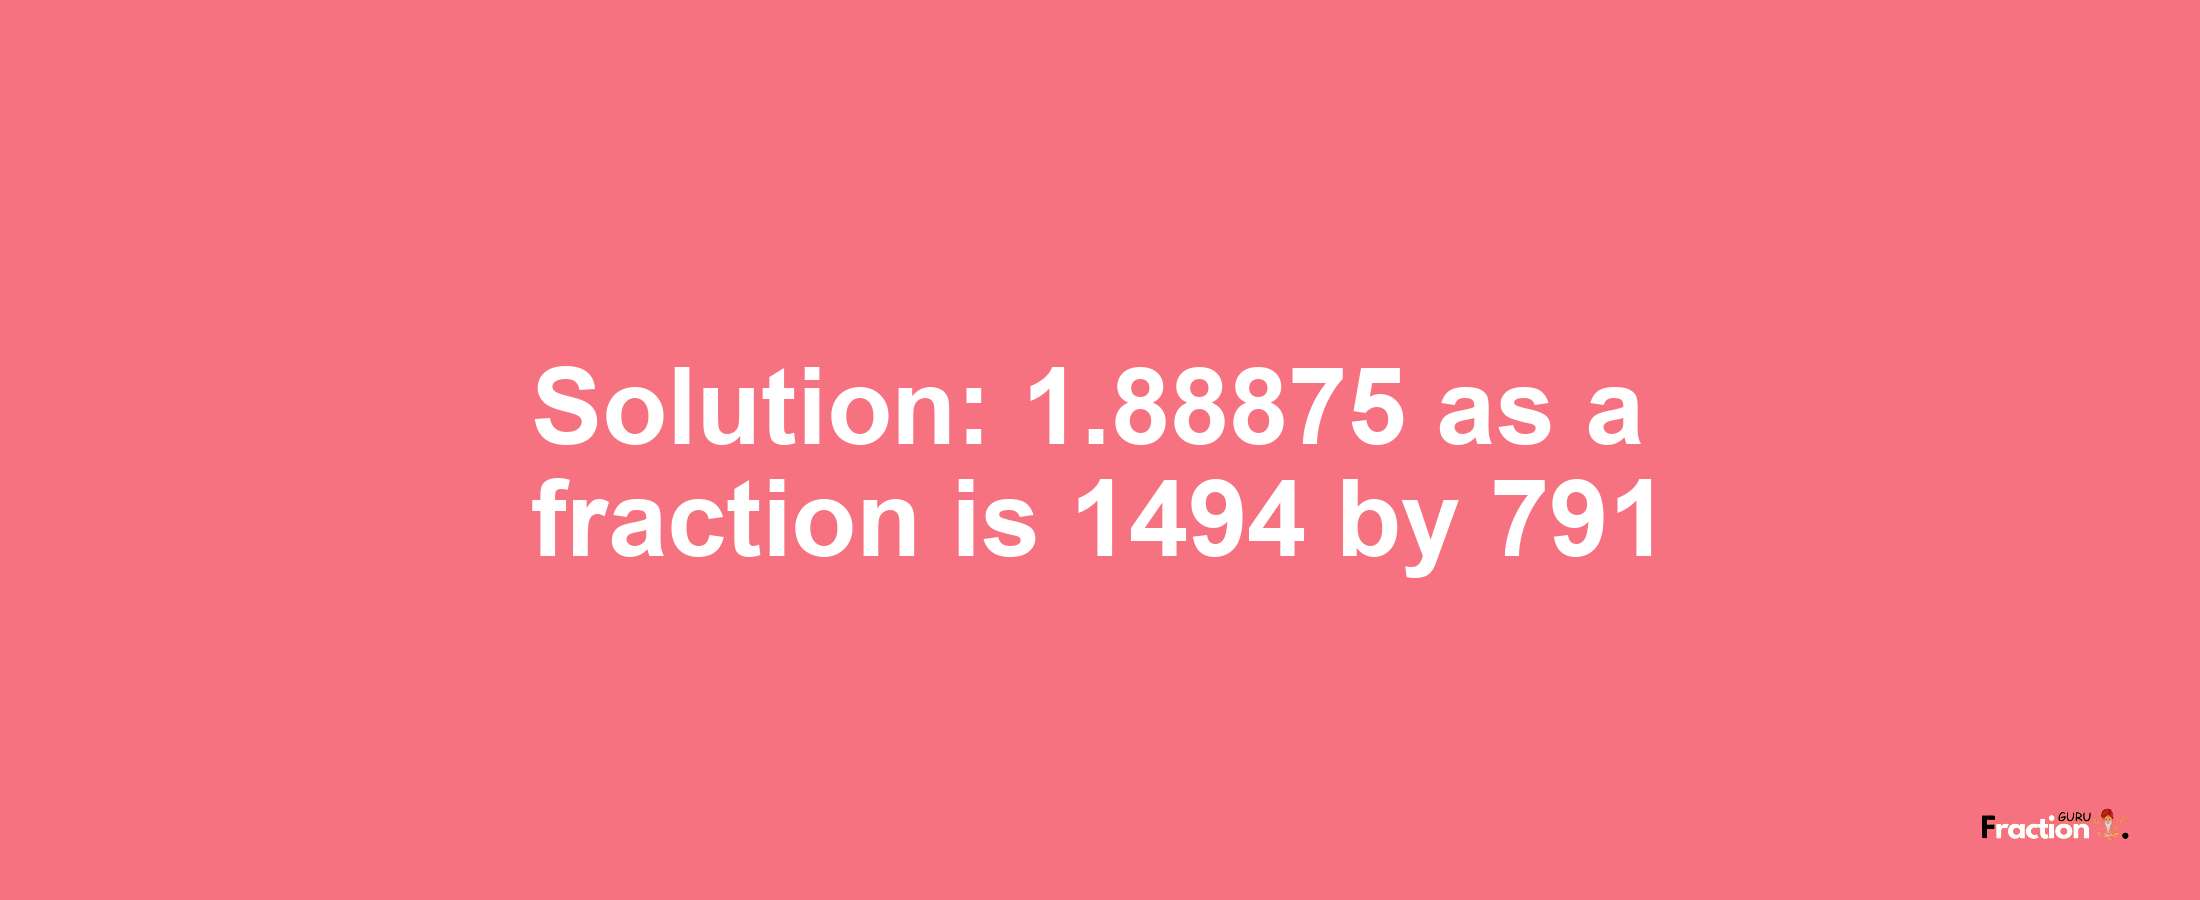 Solution:1.88875 as a fraction is 1494/791